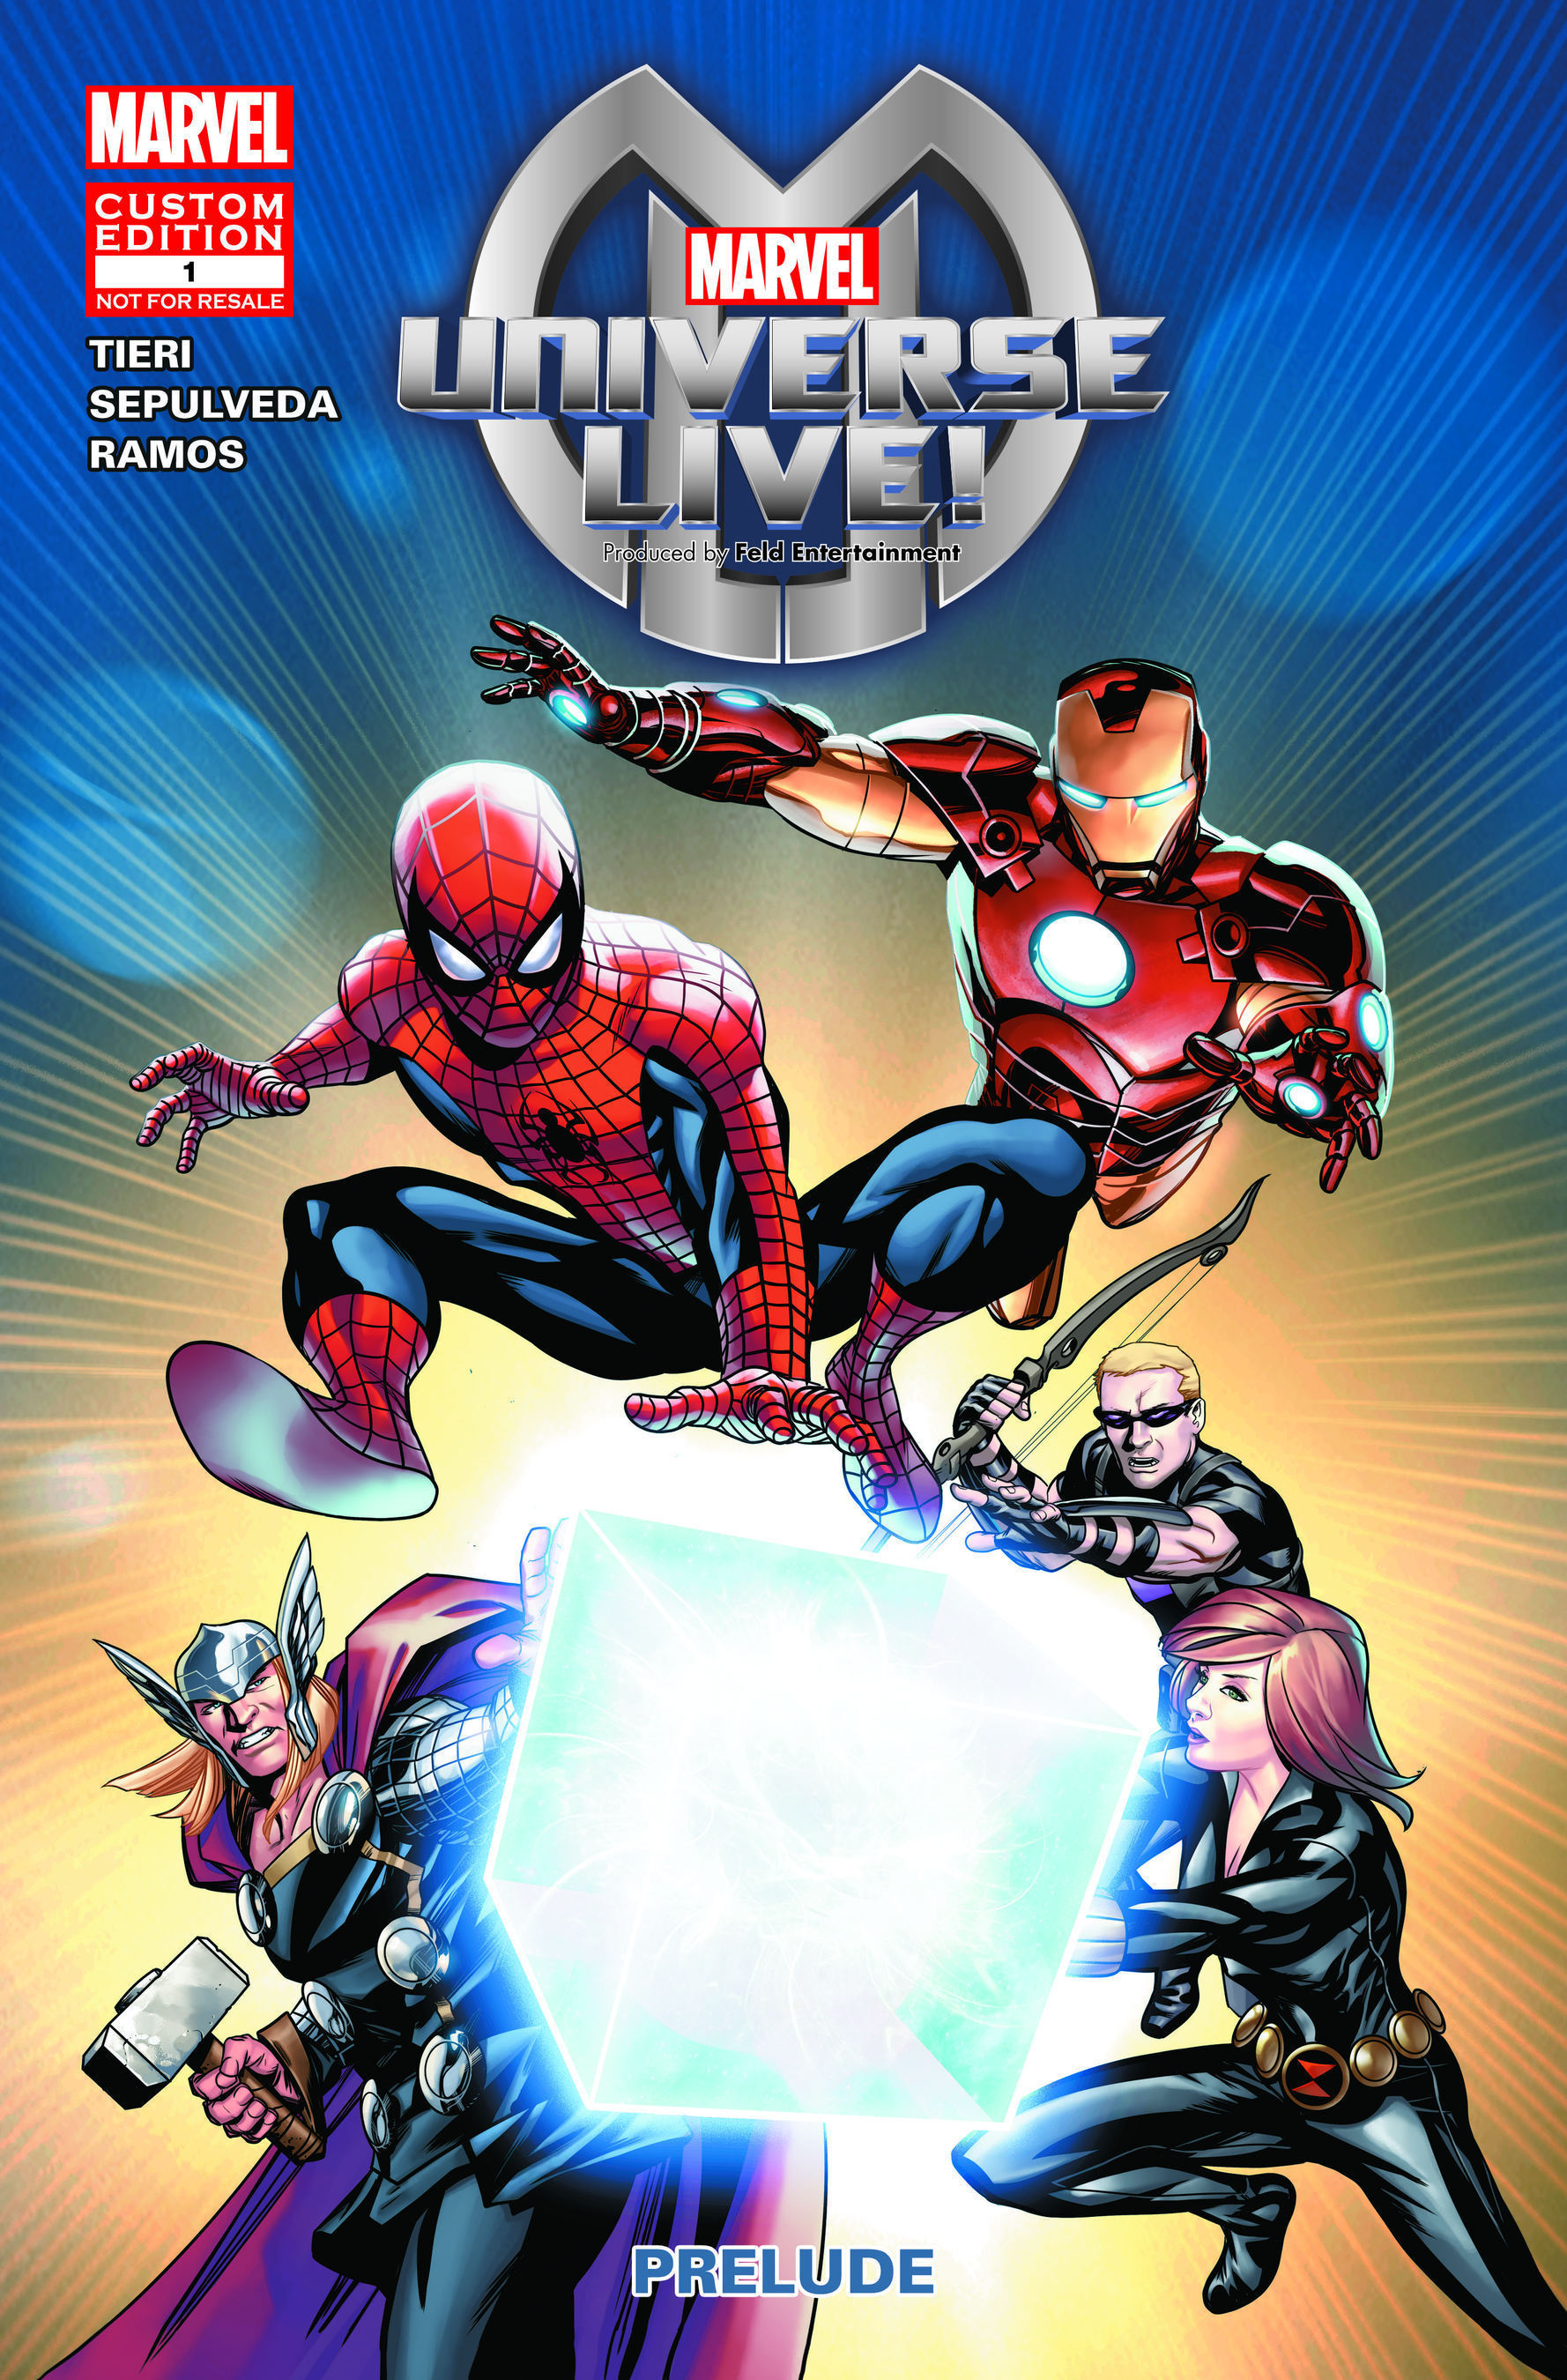 Every ticket order will receive a complimentary Marvel Universe LIVE! comic book (PRNewsFoto/Feld Entertainment, Inc.)